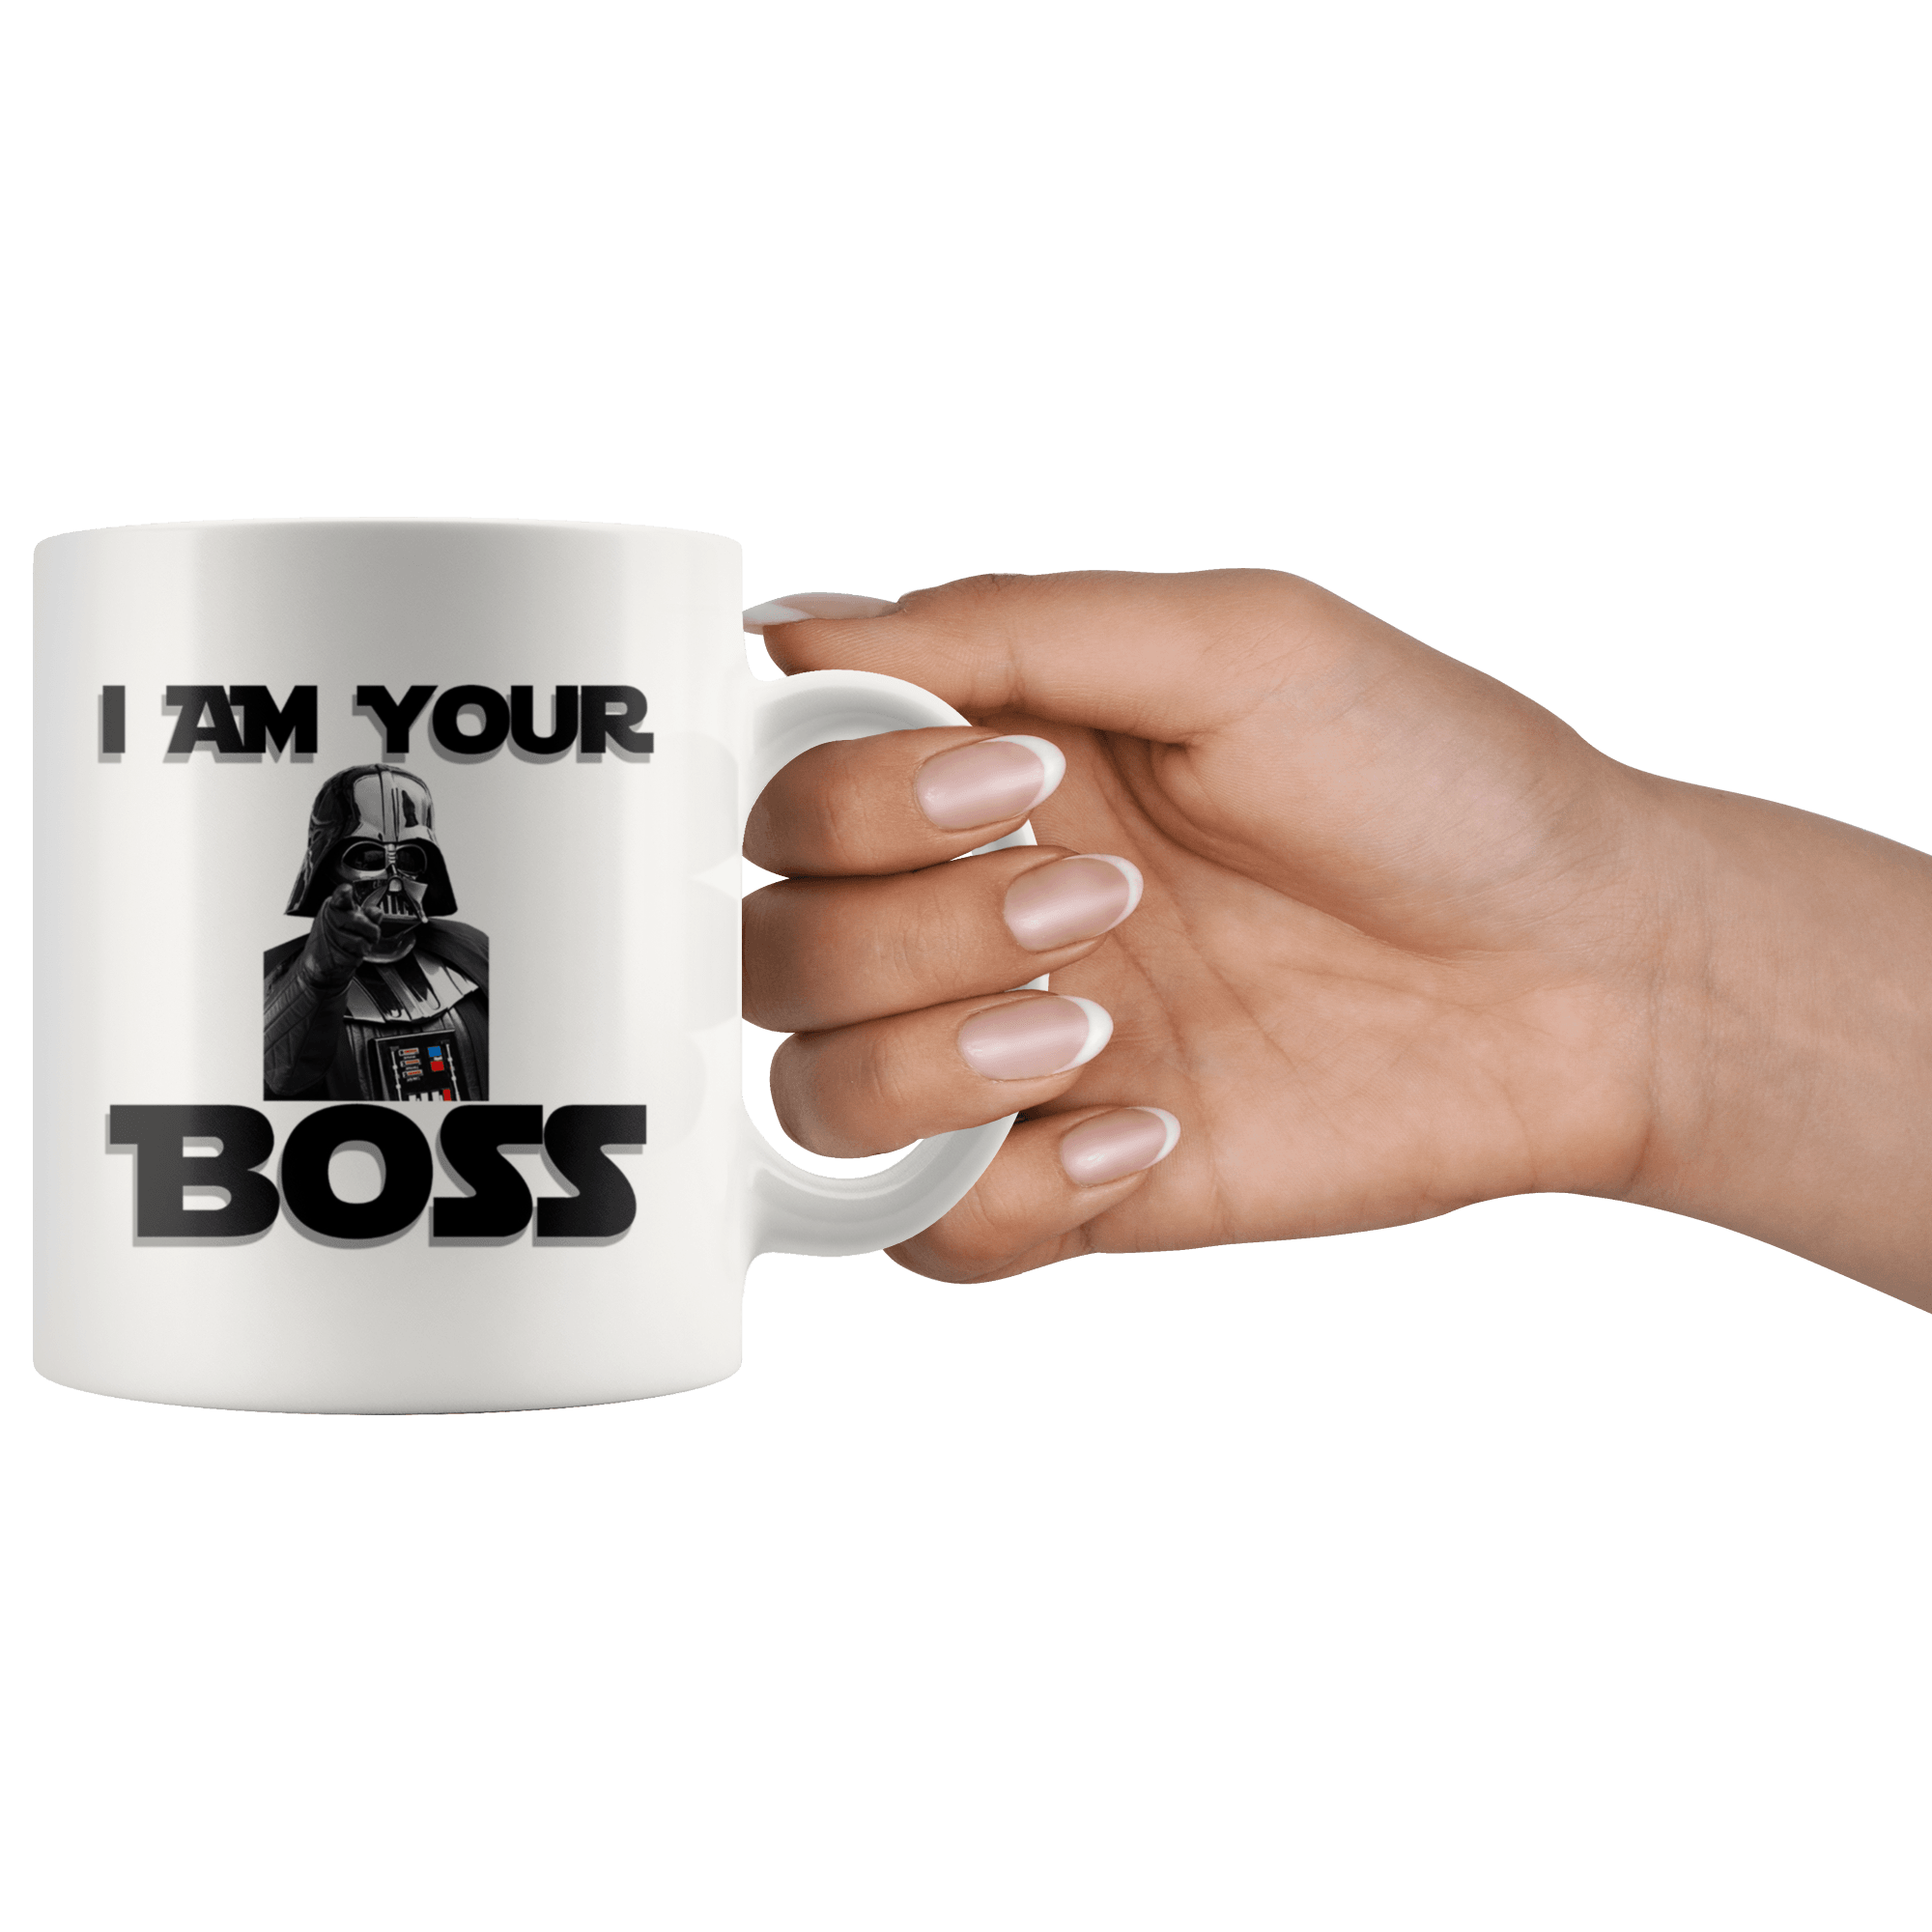 I Am Your Boss Coffee Mug - Coffee Cups Gift Idea For Men or Women Bos ...